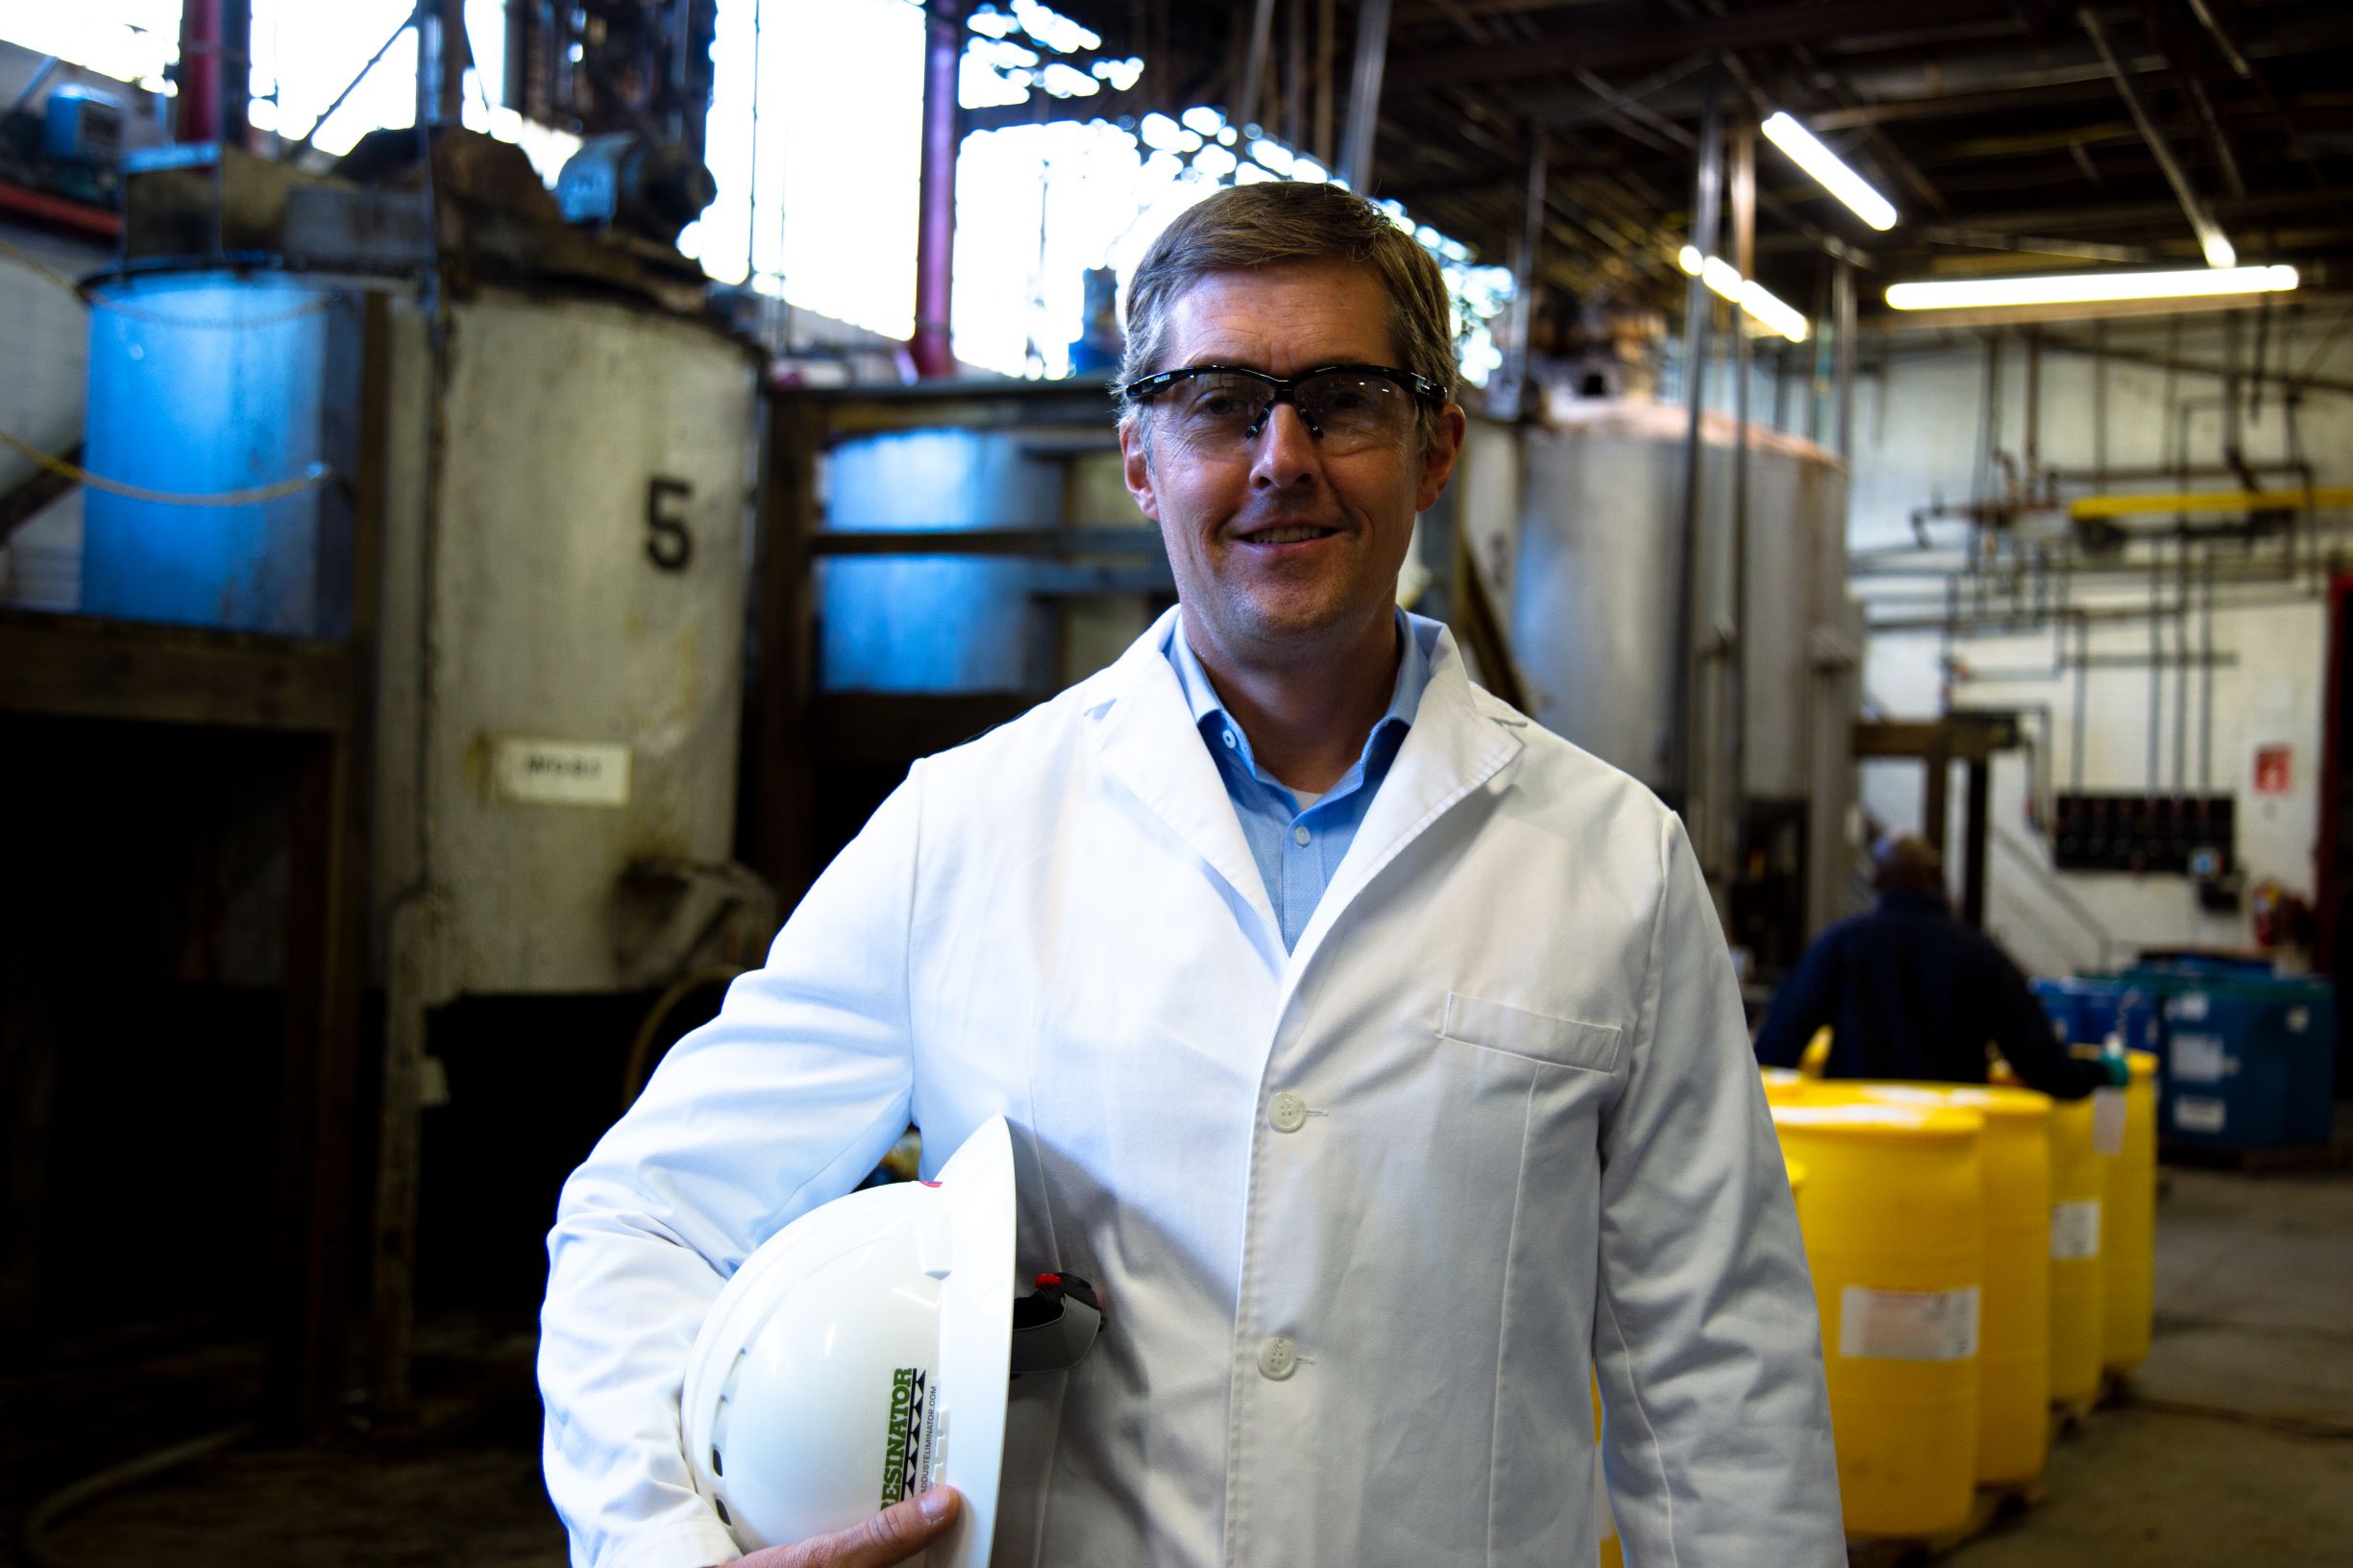 Momar Chief Technical Officer, West Gary, in the company's Atlanta mixing, packaging, and shipping facility.